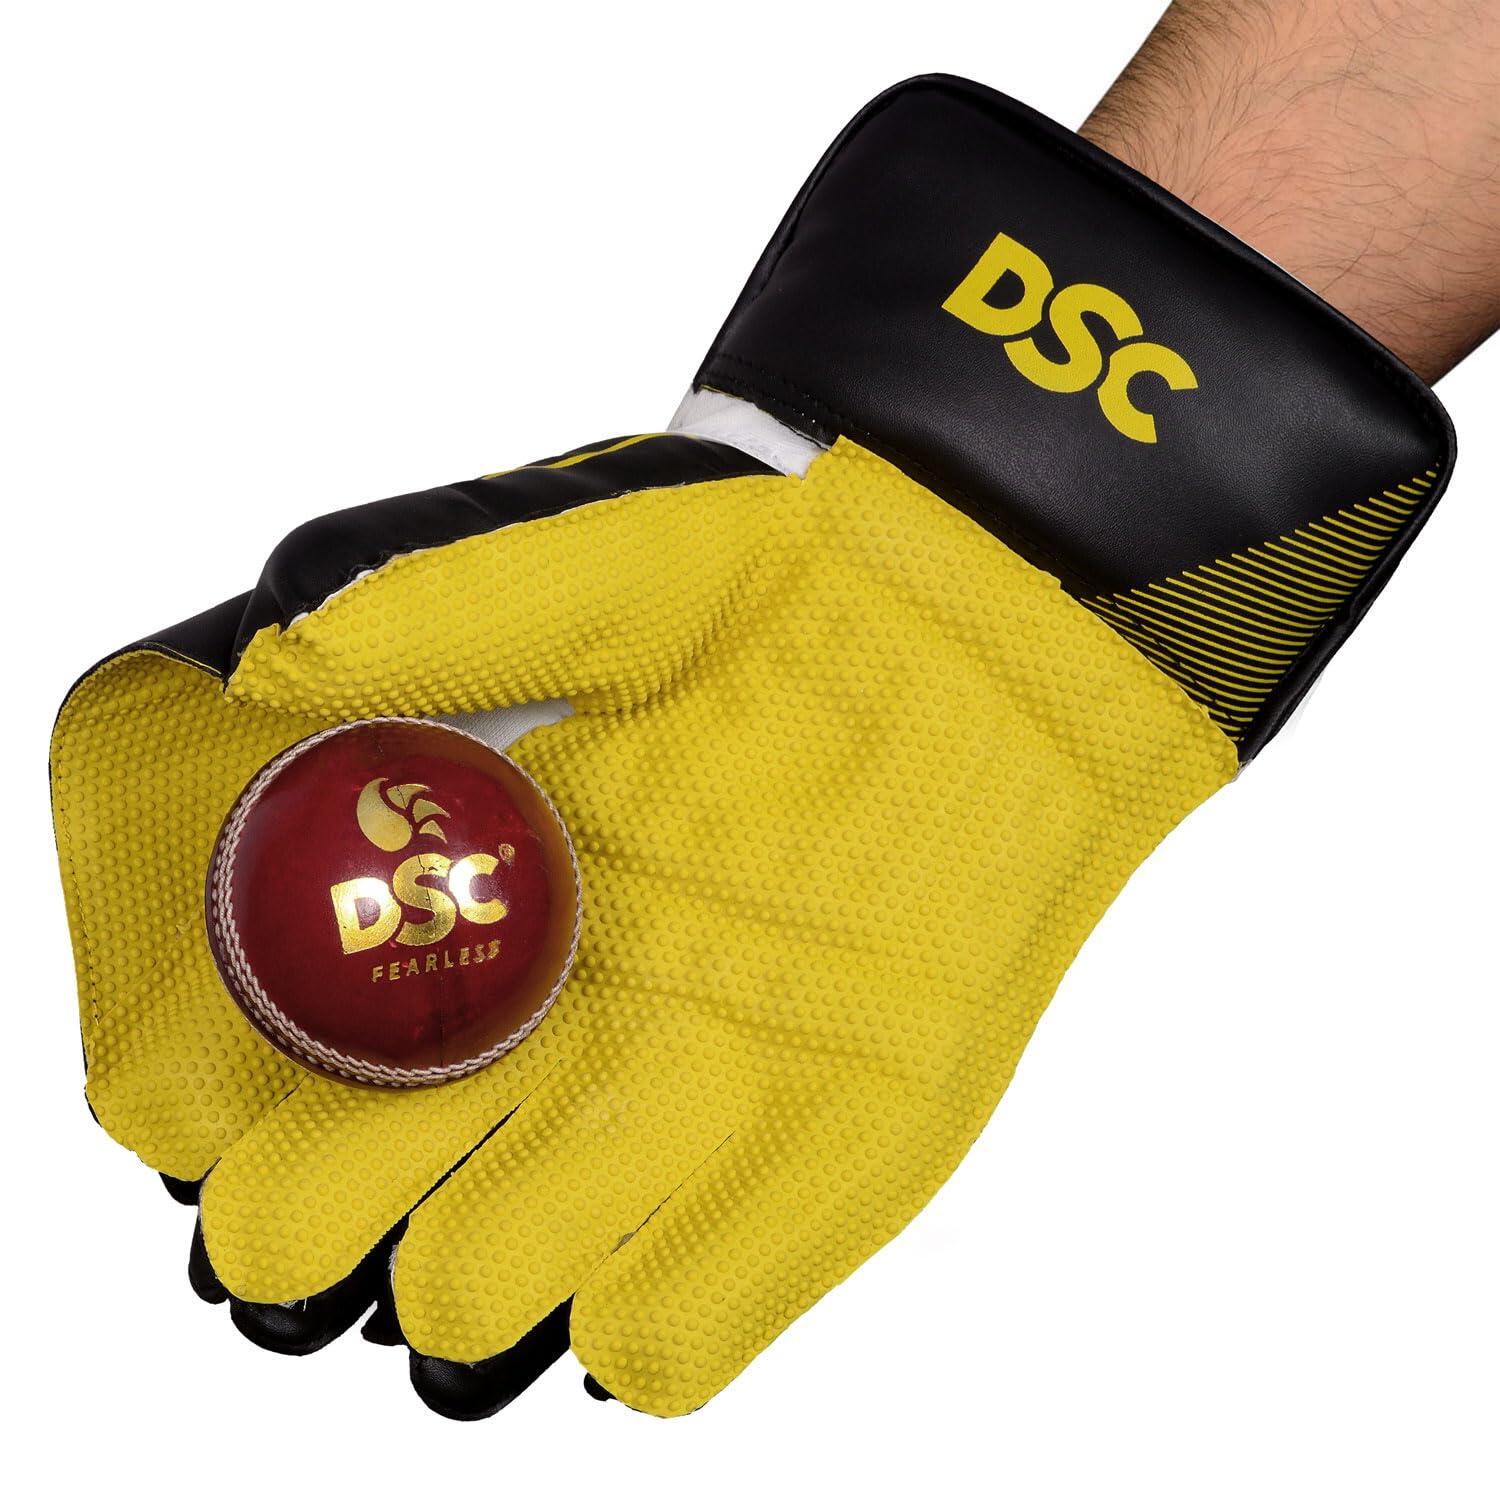 DSC Condor Ruffle Cricket Wicket Keeping Gloves | Material- Leather Ruffle 5/5